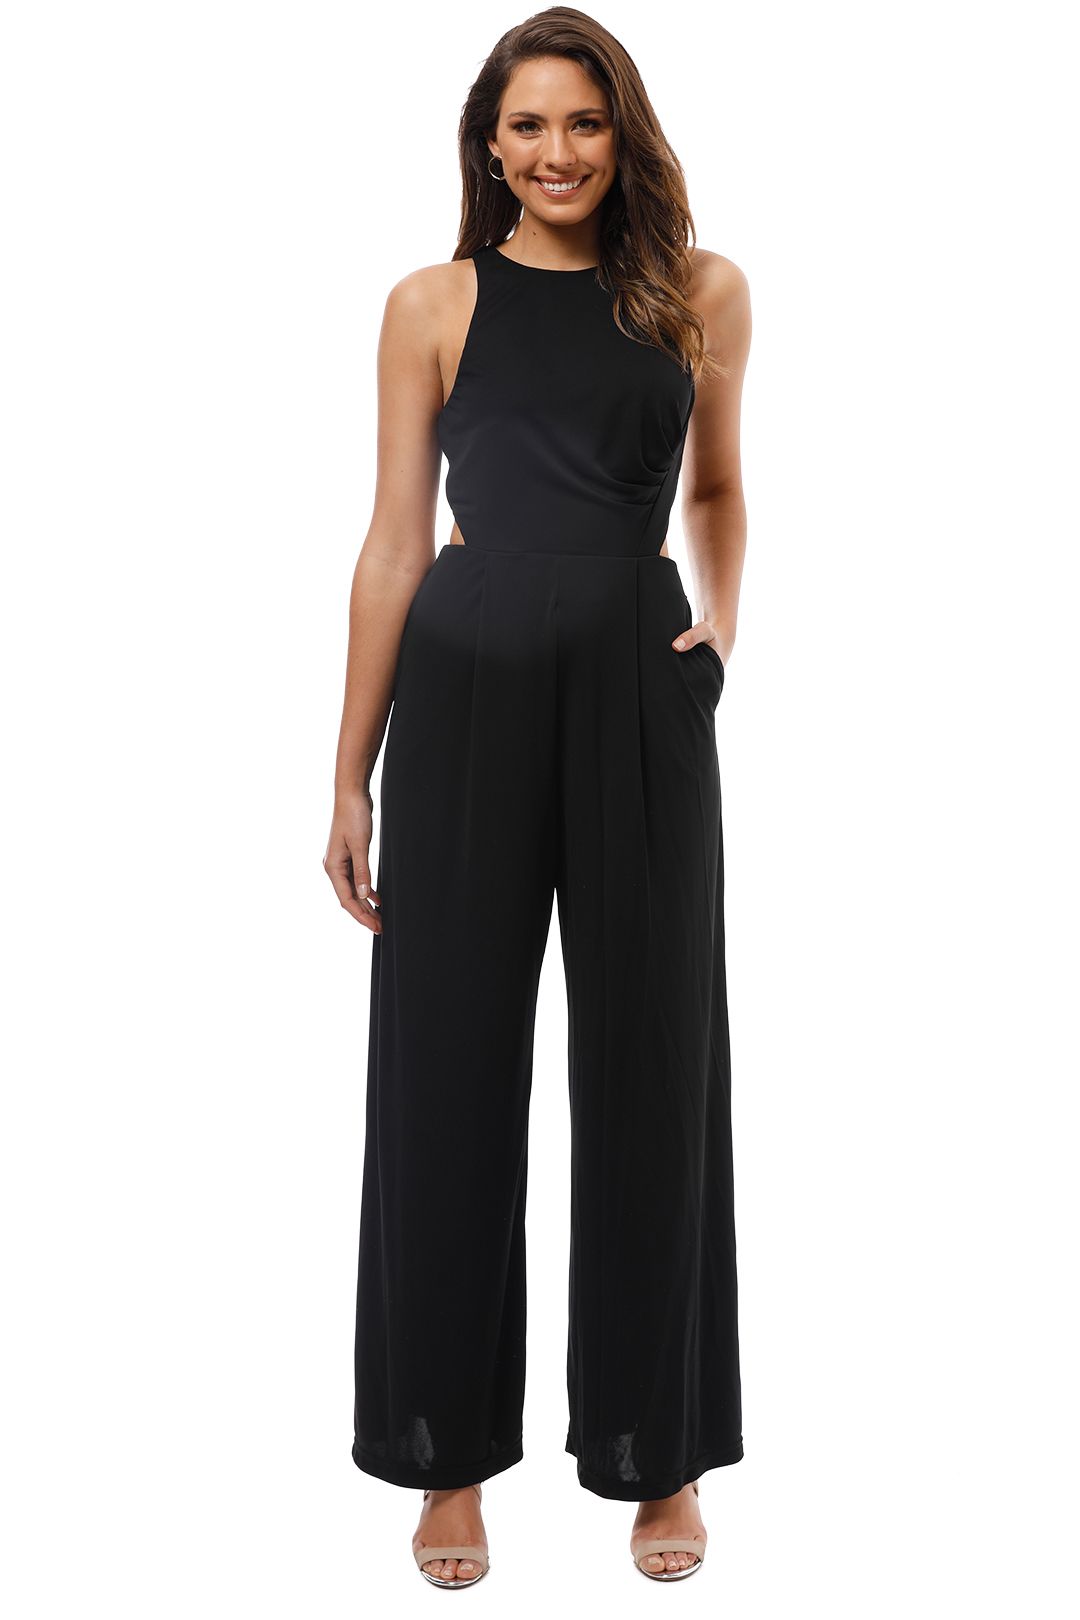 Queen Bee Pantsuit in Black by Pasduchas for Hire